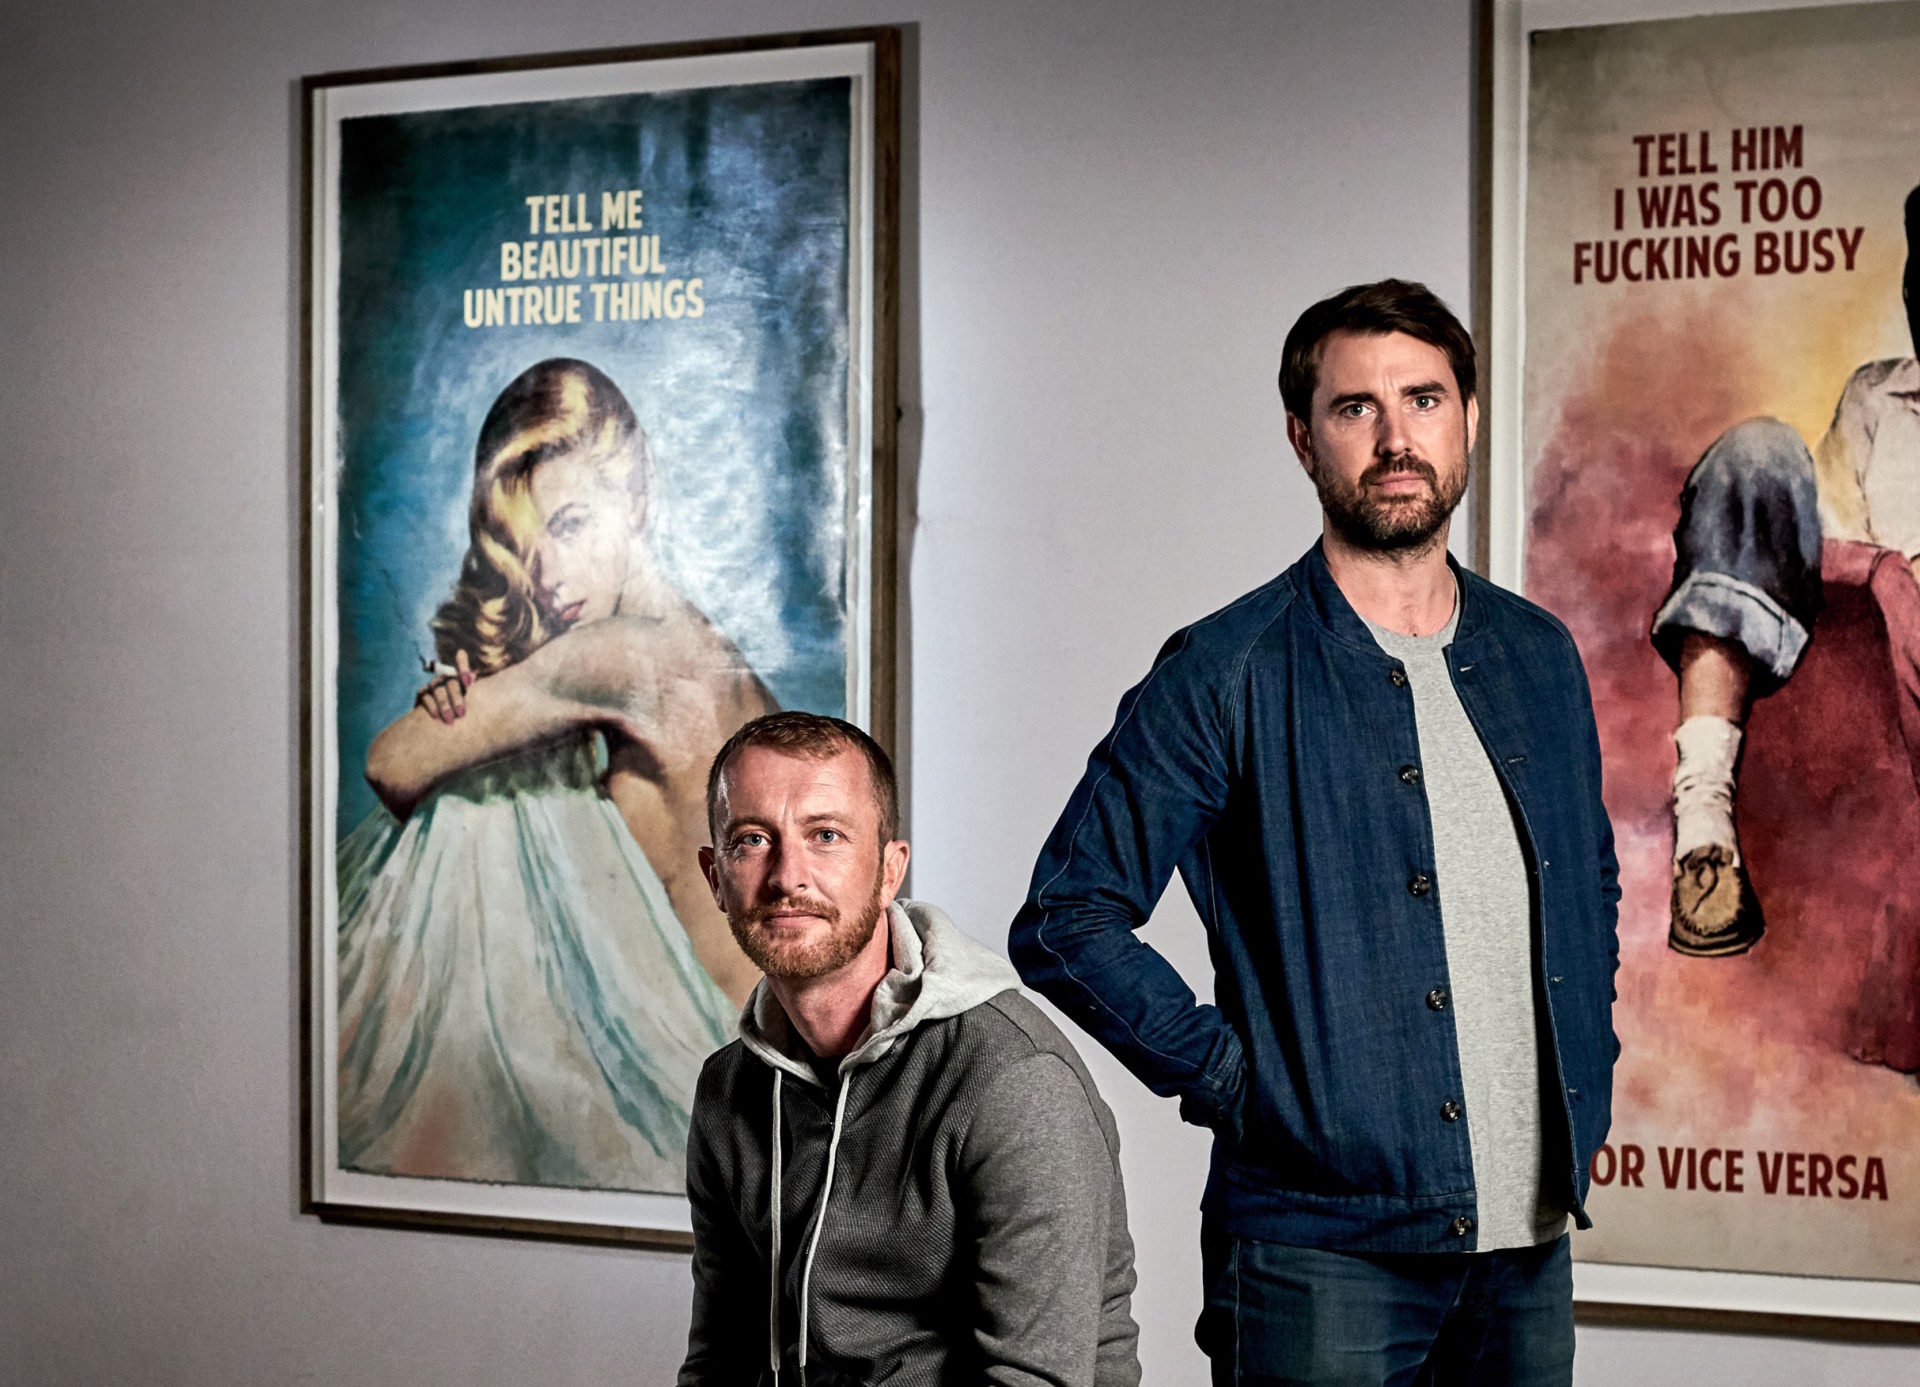 The Connor Brothers The Artists On Art Amp Mental Health The Book Of Man